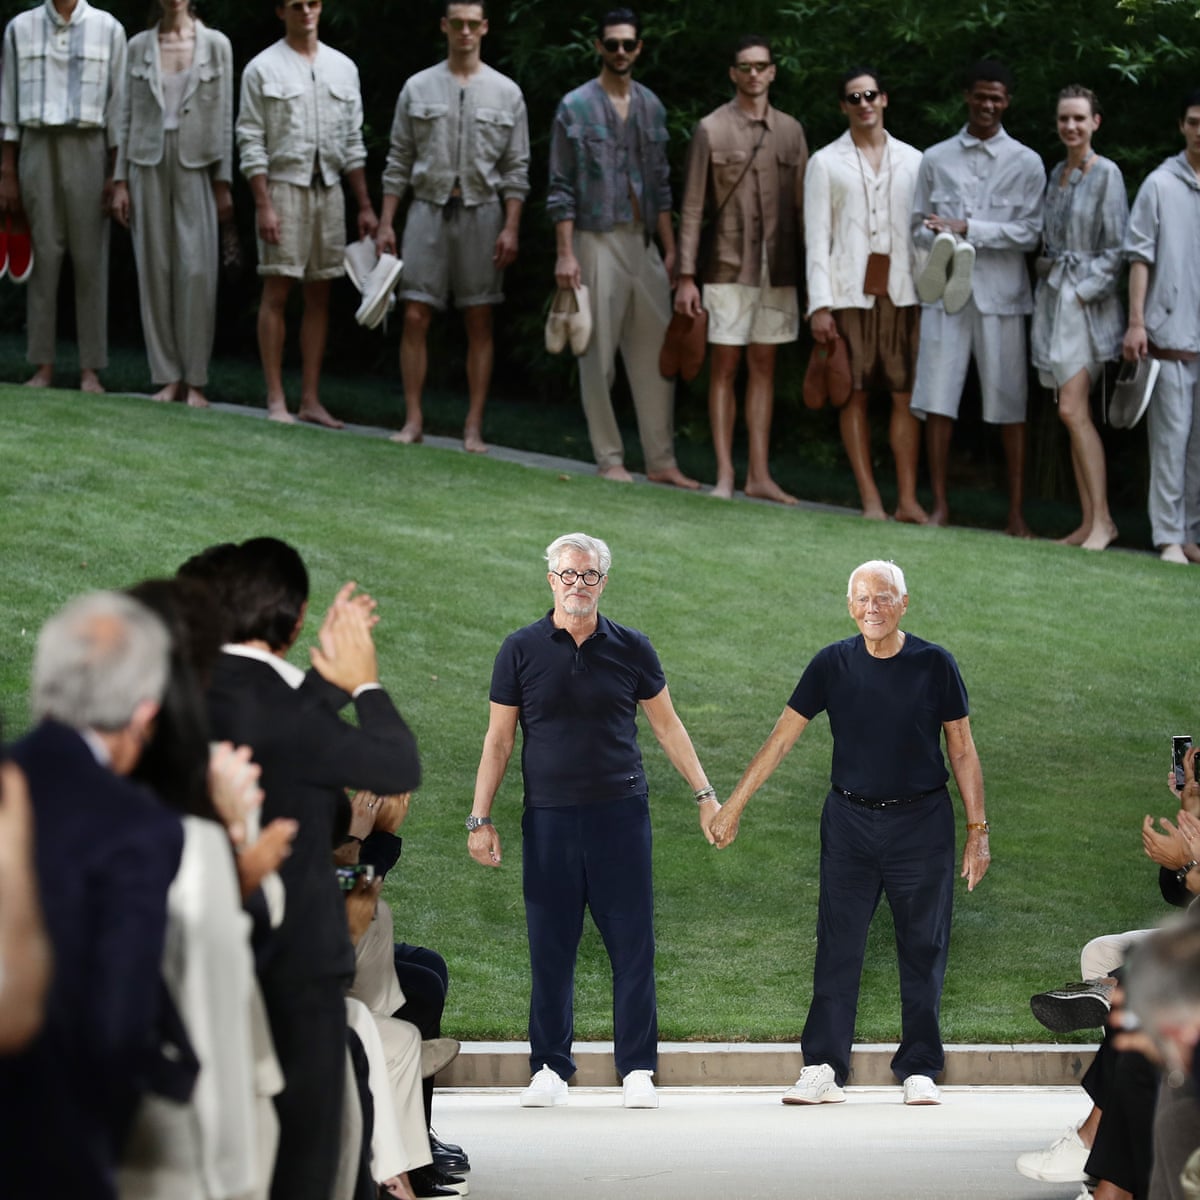 Sustainable Trends  Giorgio Armani Spring Summer 2023 Ready-to-Wear